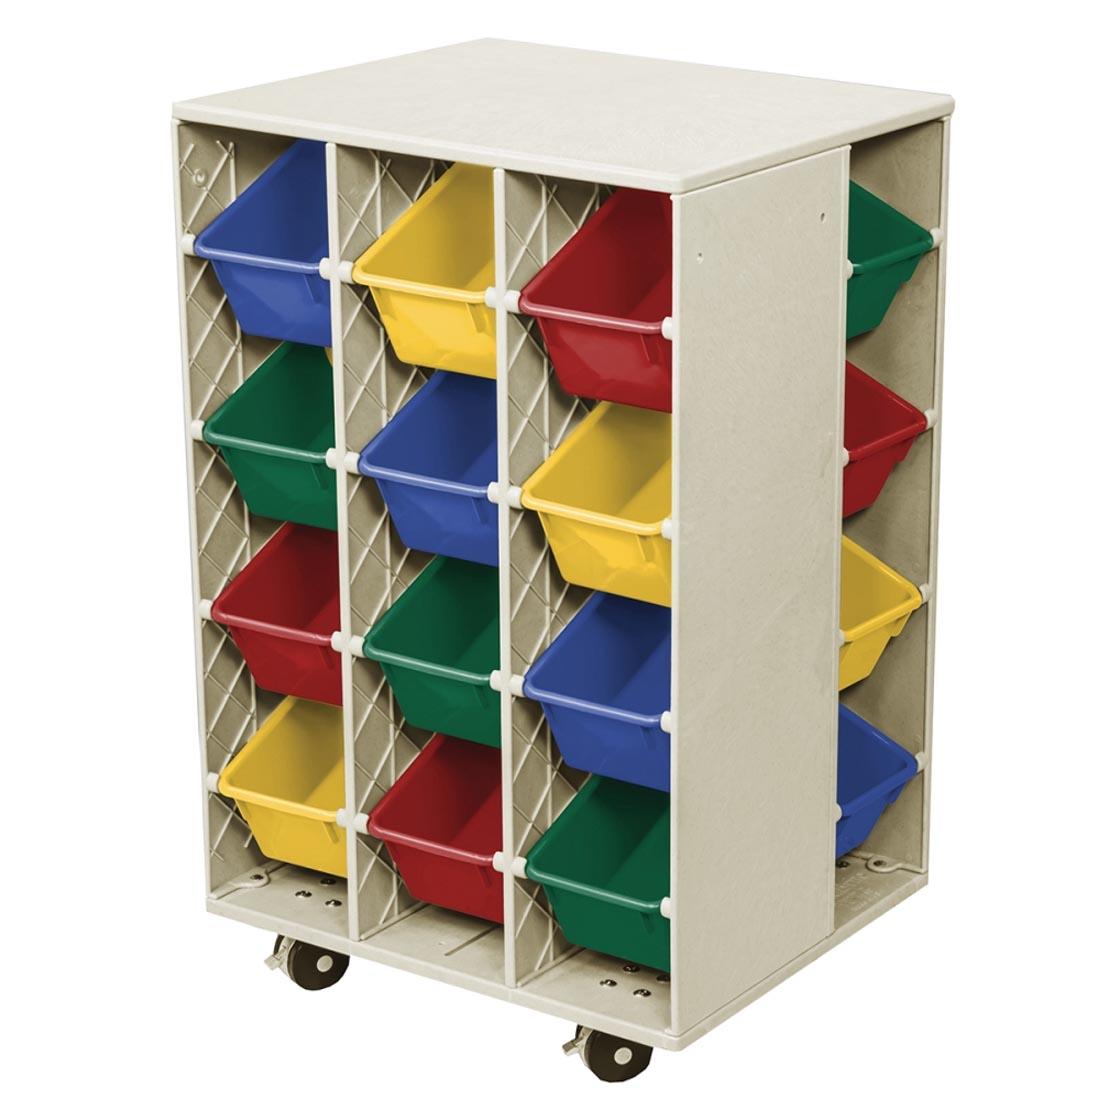 Mobl Lite Wall Storage Center with Colored Totes